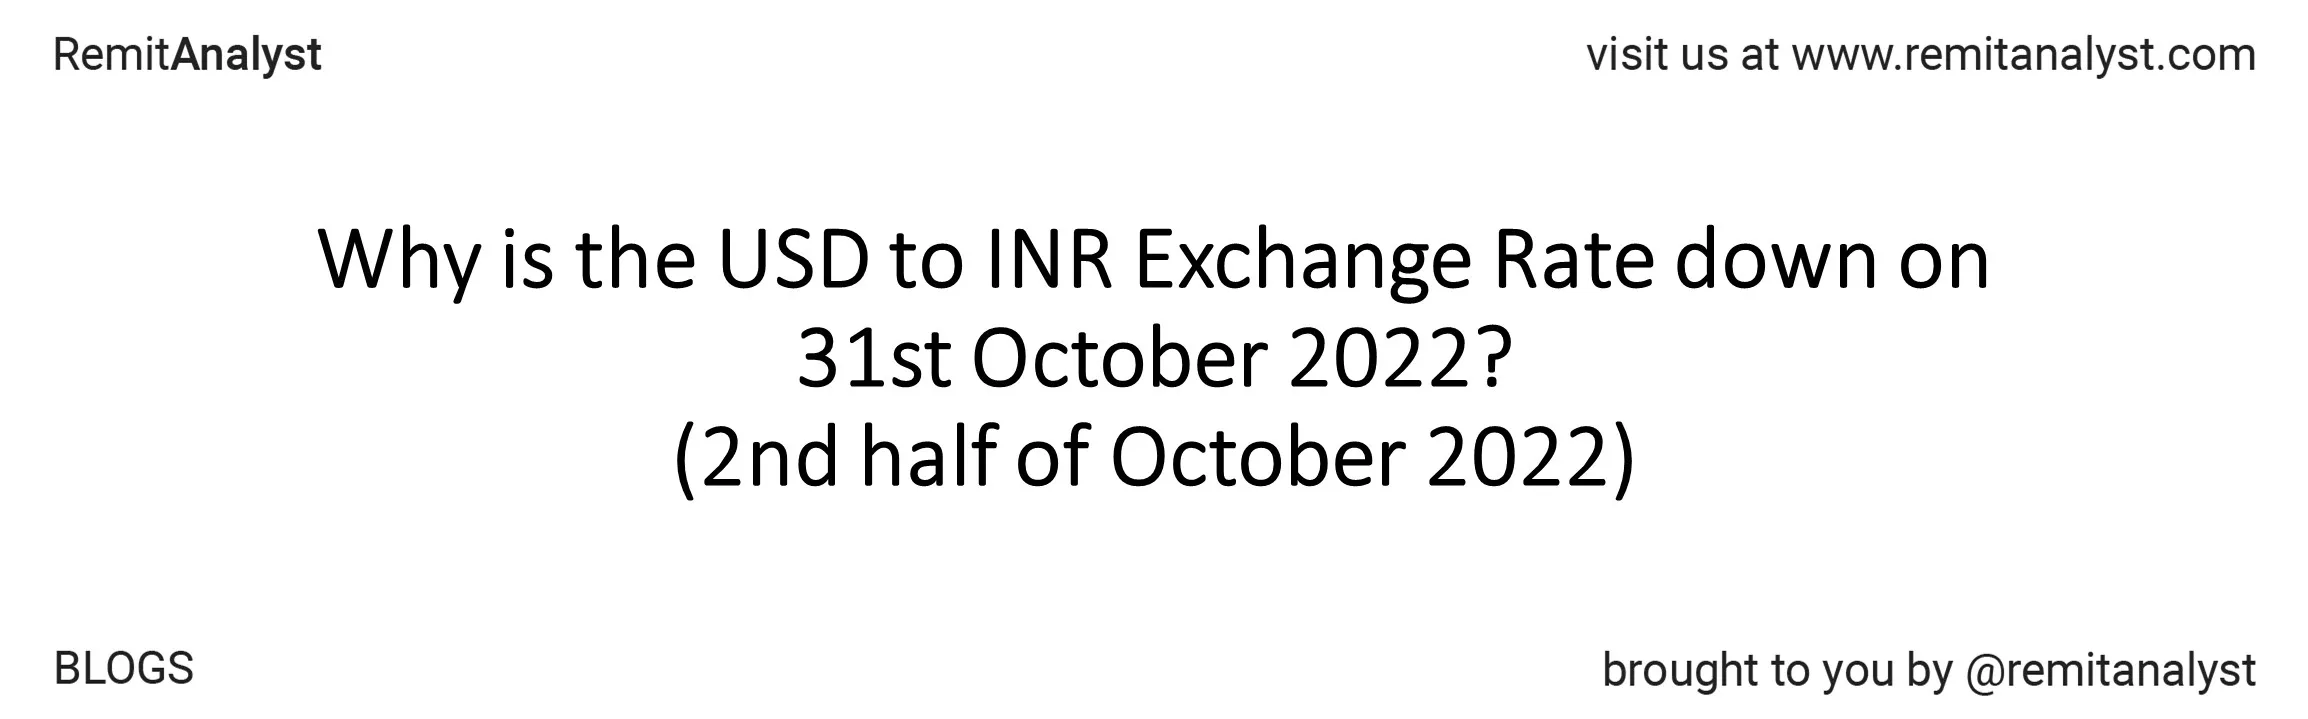 usdtoinrexchangerate16oct2022to31oct2022title